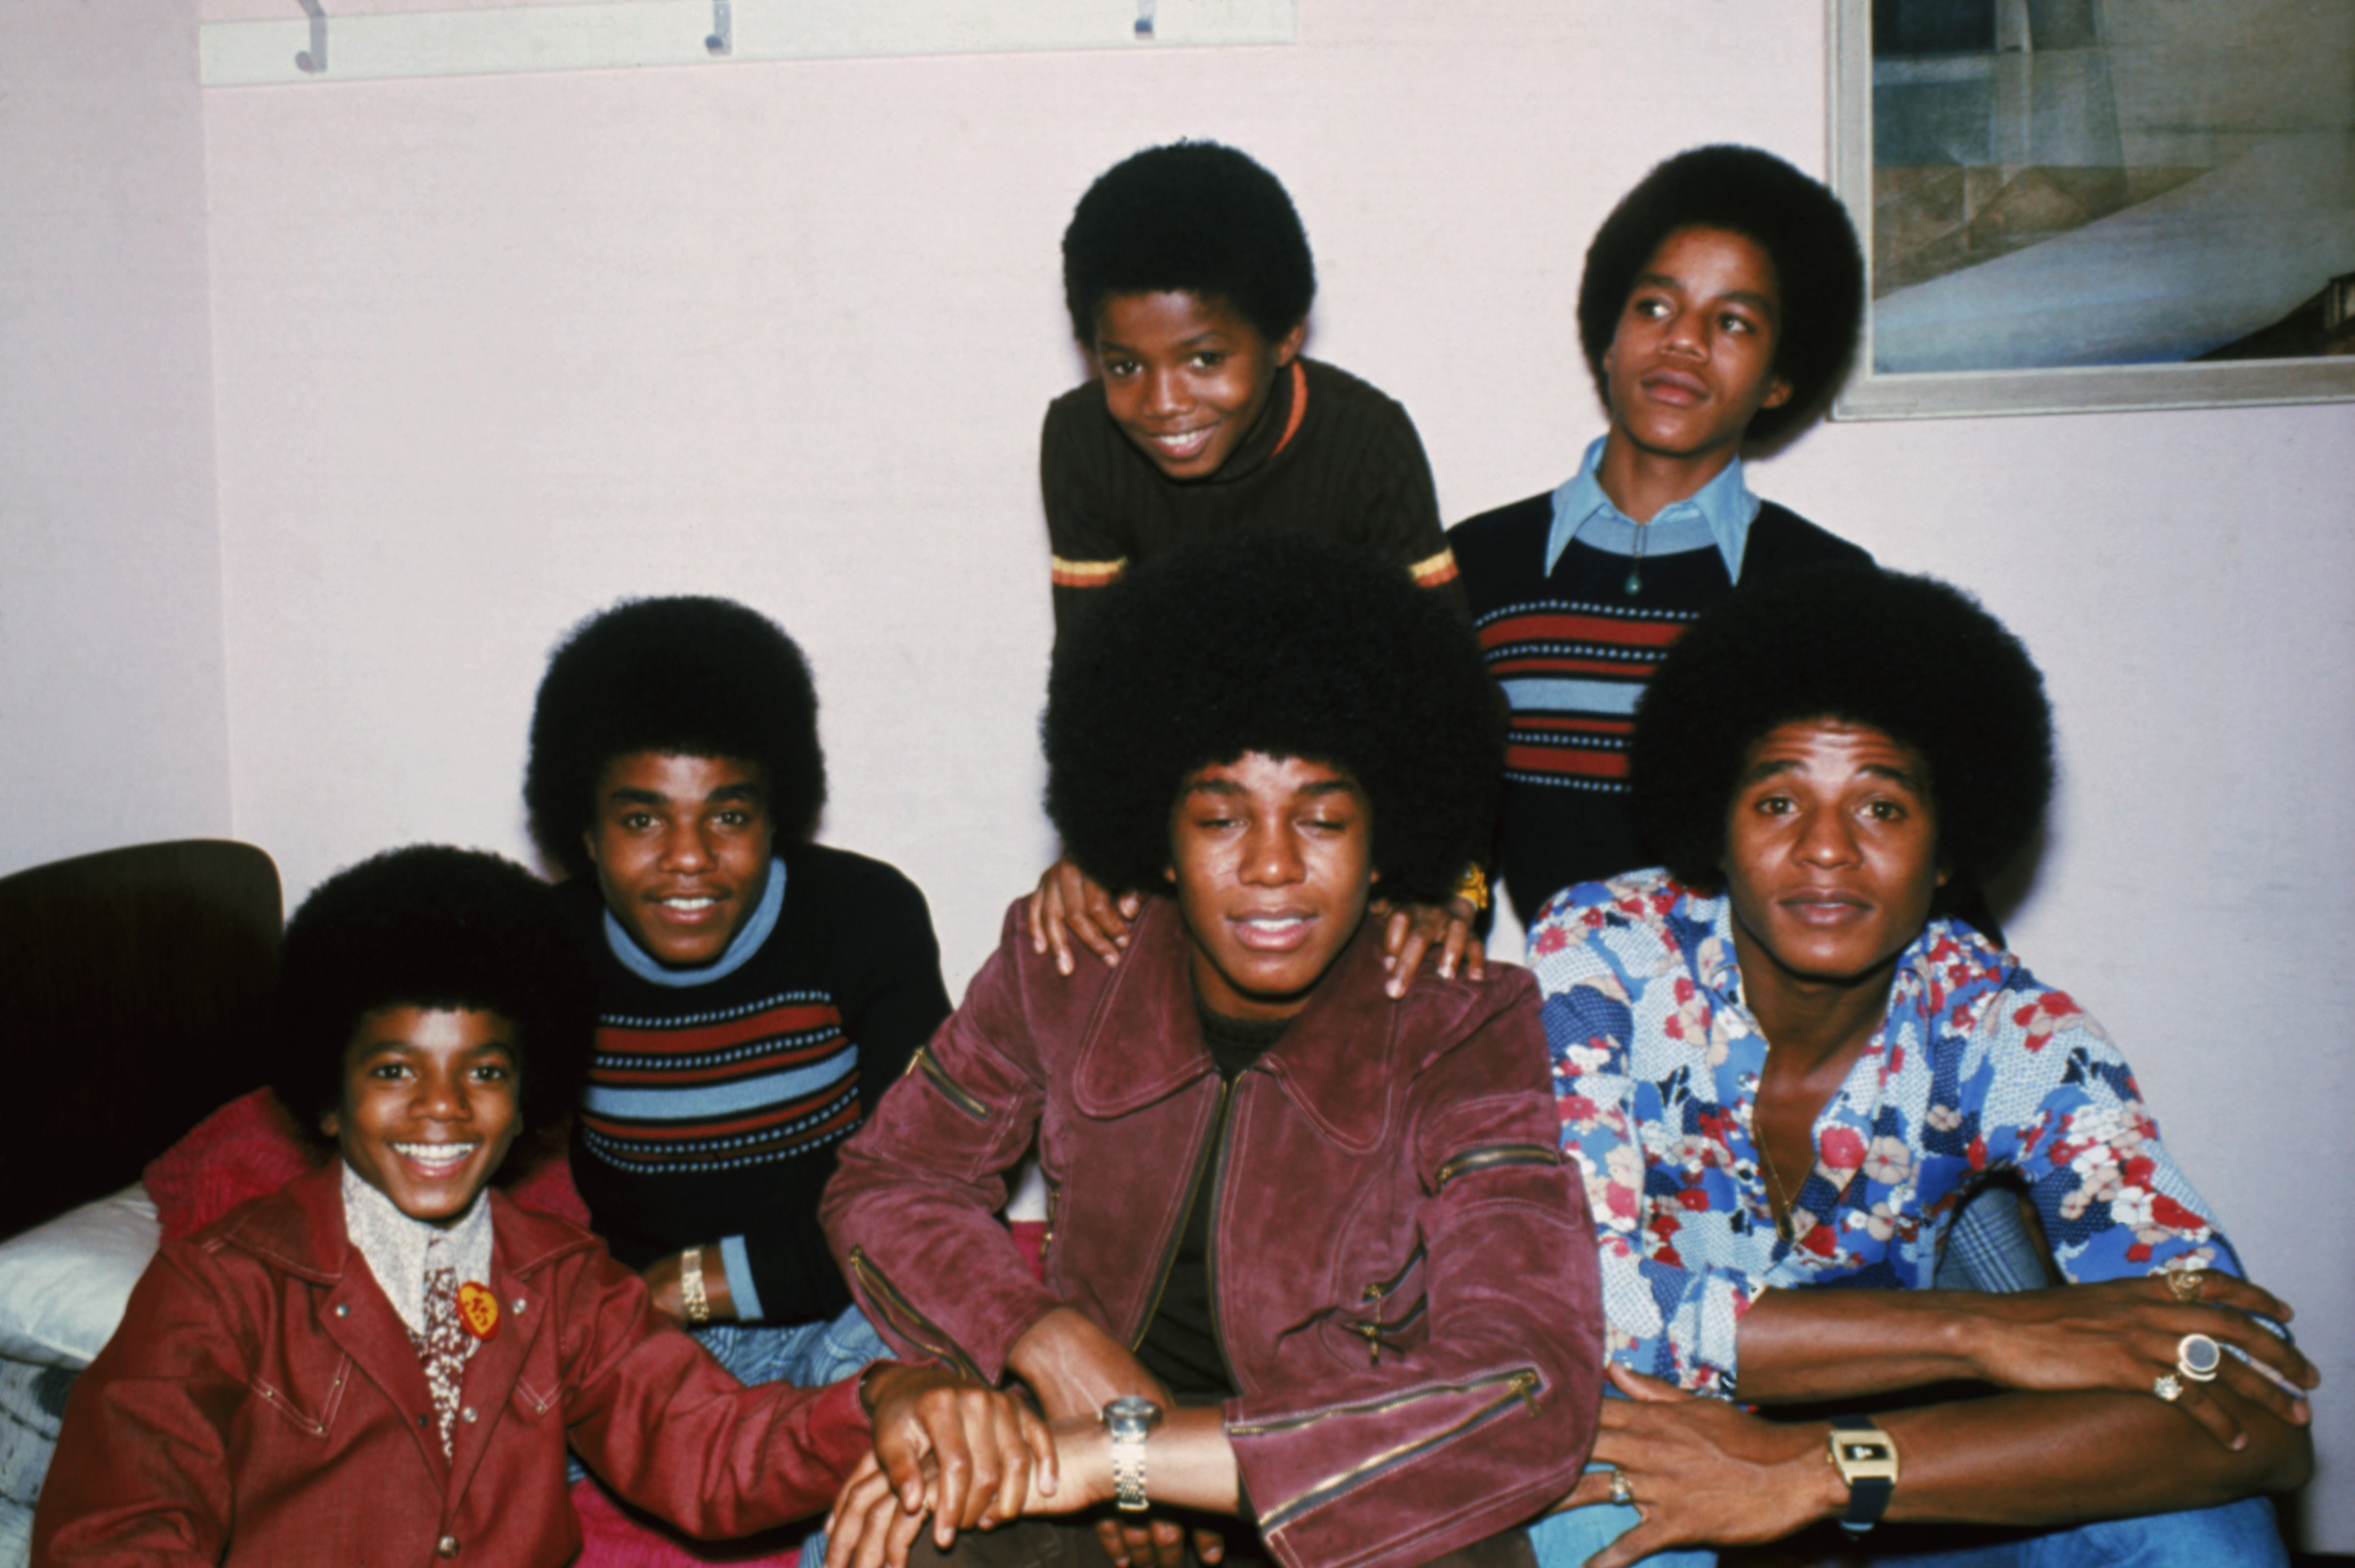 Michael Jackson, the youngest among his siblings, with his brothers, Jackie, Tito, Jermaine, Marlon, and Randy, collectively known as the Jackson Five in 1972. | Photo: Getty Images